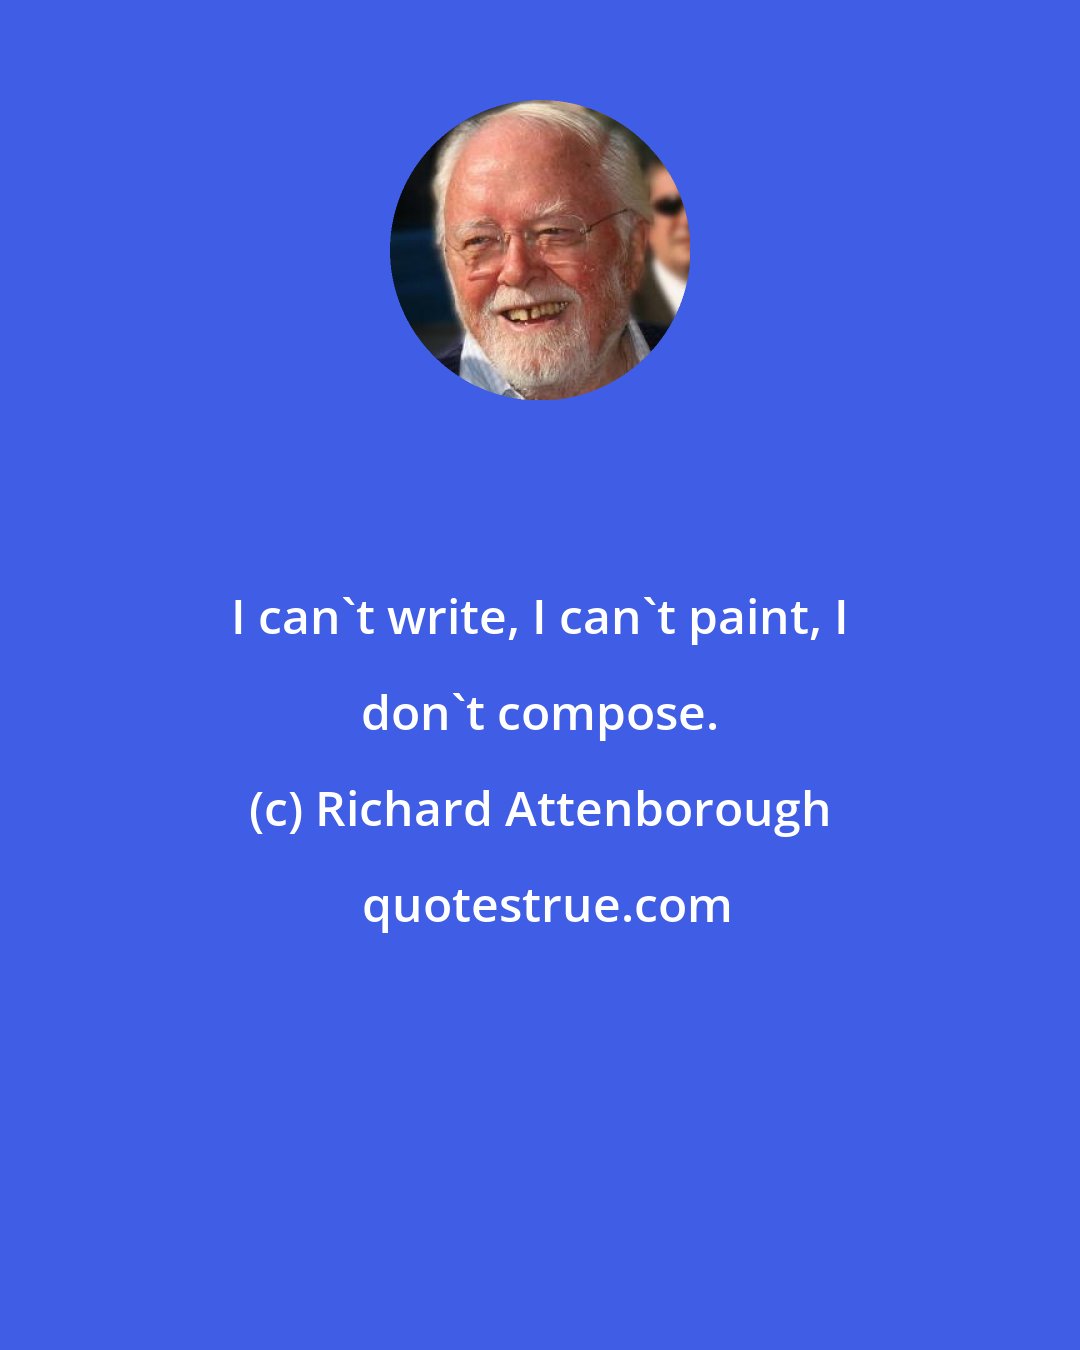 Richard Attenborough: I can't write, I can't paint, I don't compose.